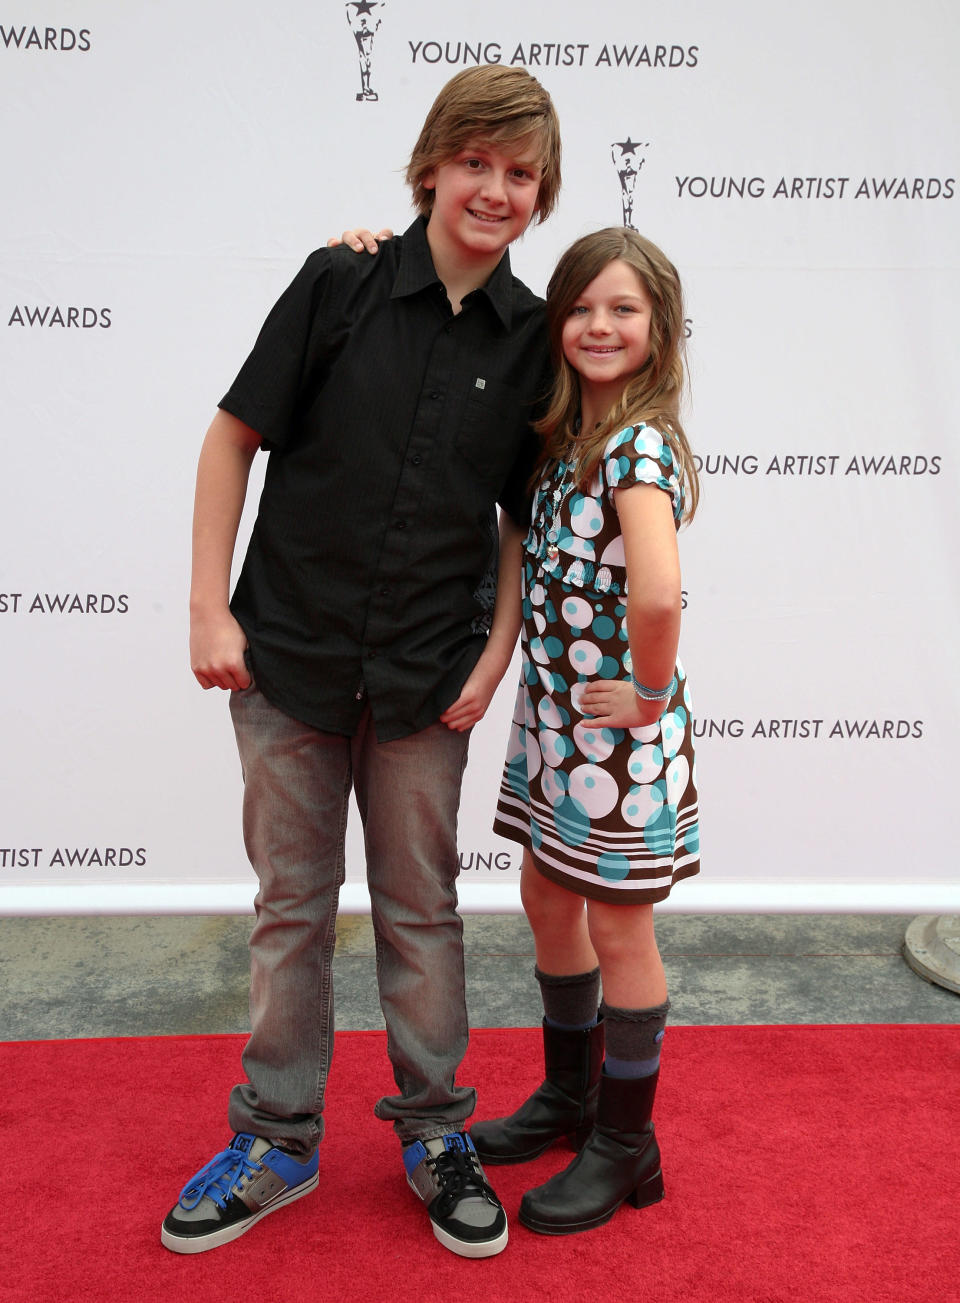 Actors Austin Majors and Kali Majors arrive at the 30th Annual Young Artist Awards at the Globe Theatre on March 29, 2009, in Los Angeles, California.  / Credit: Angela Weiss via Getty Images